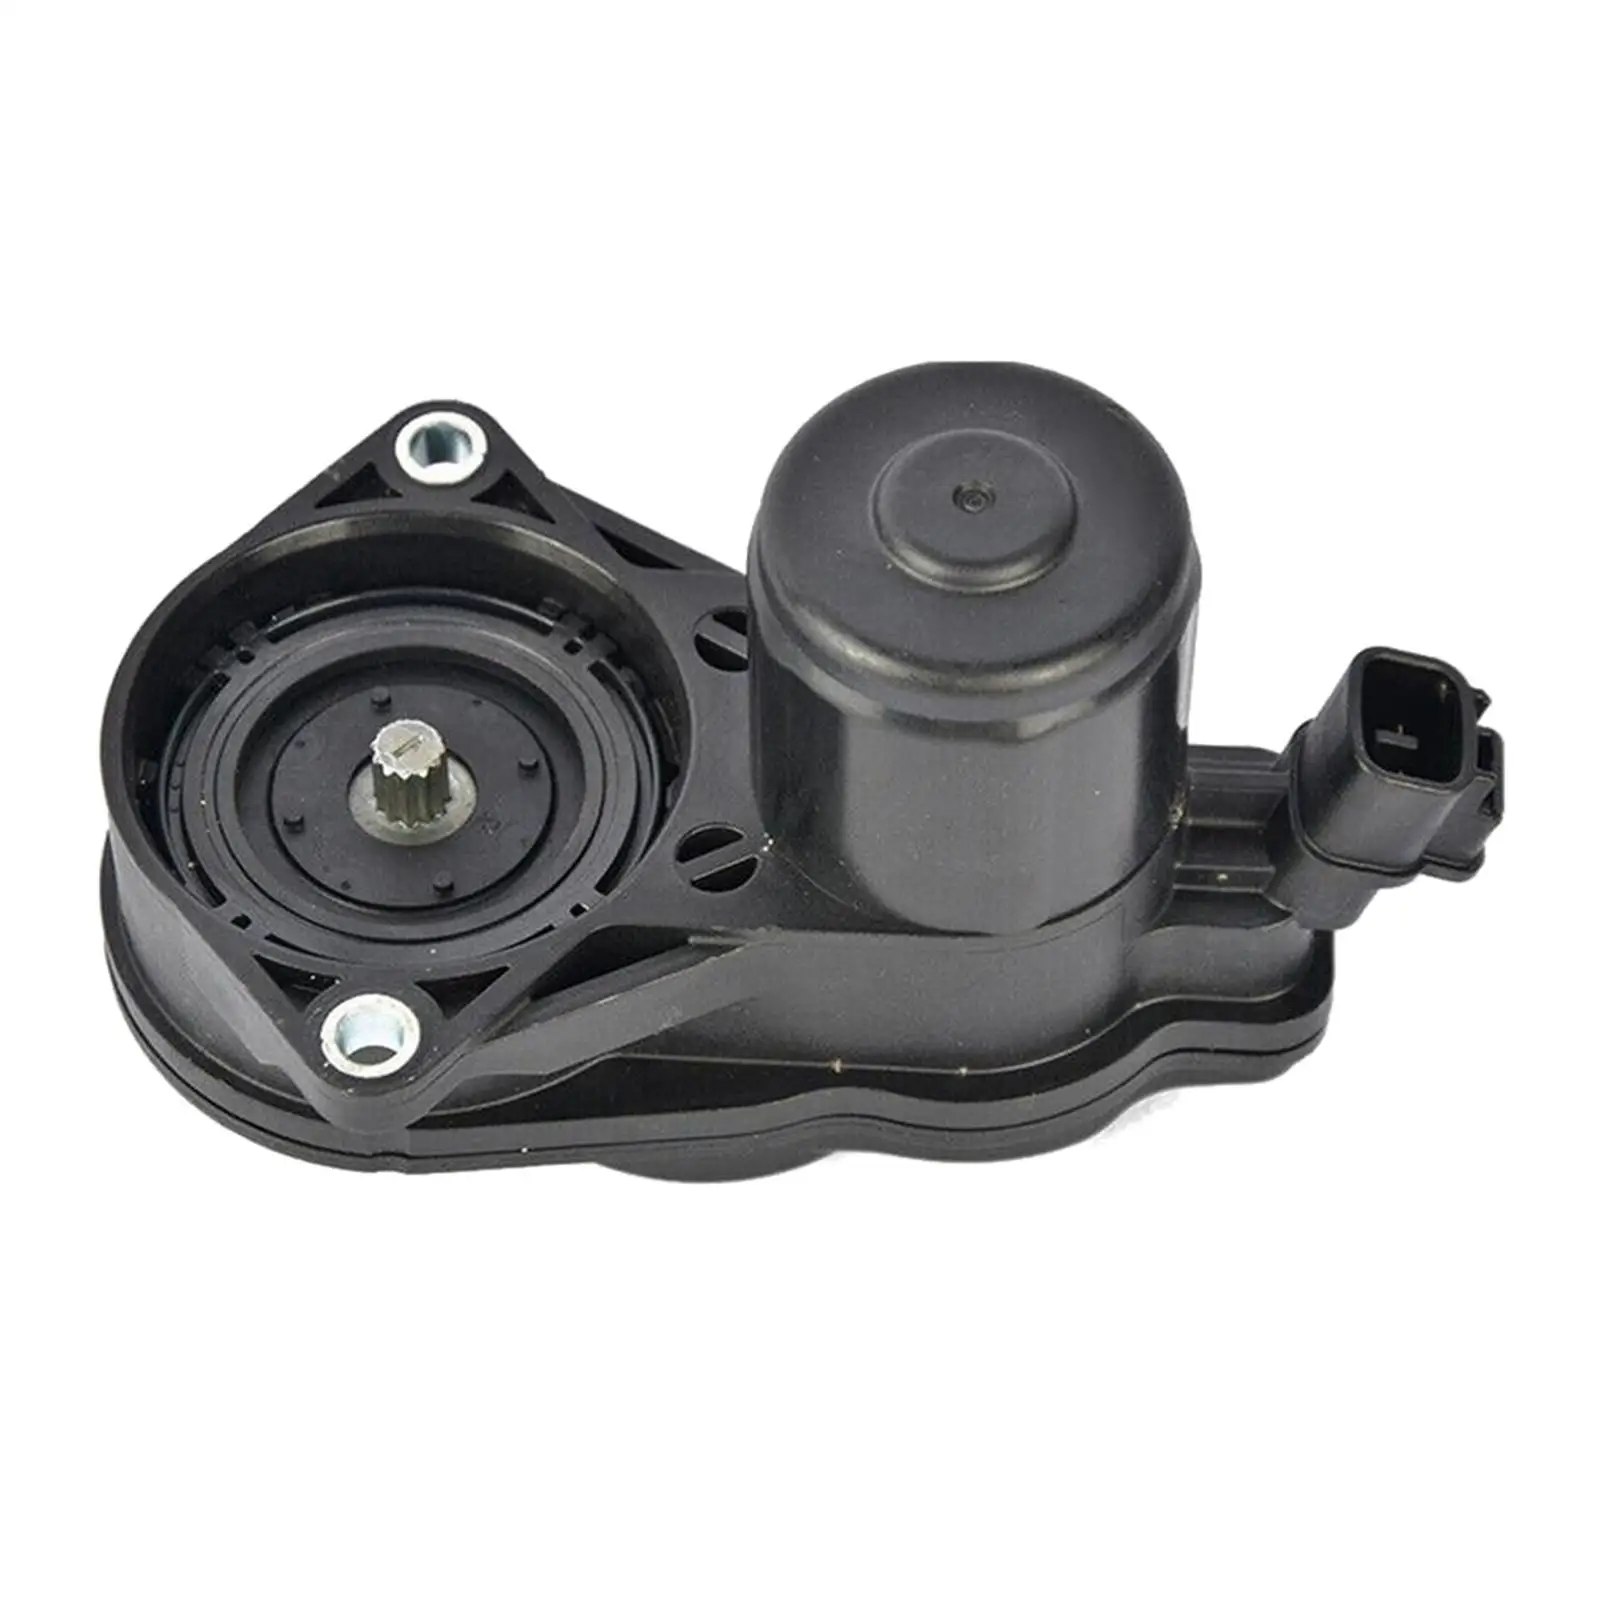 Parking Brake Actuator Assembly Replaces for Toyota for highlander Avalon